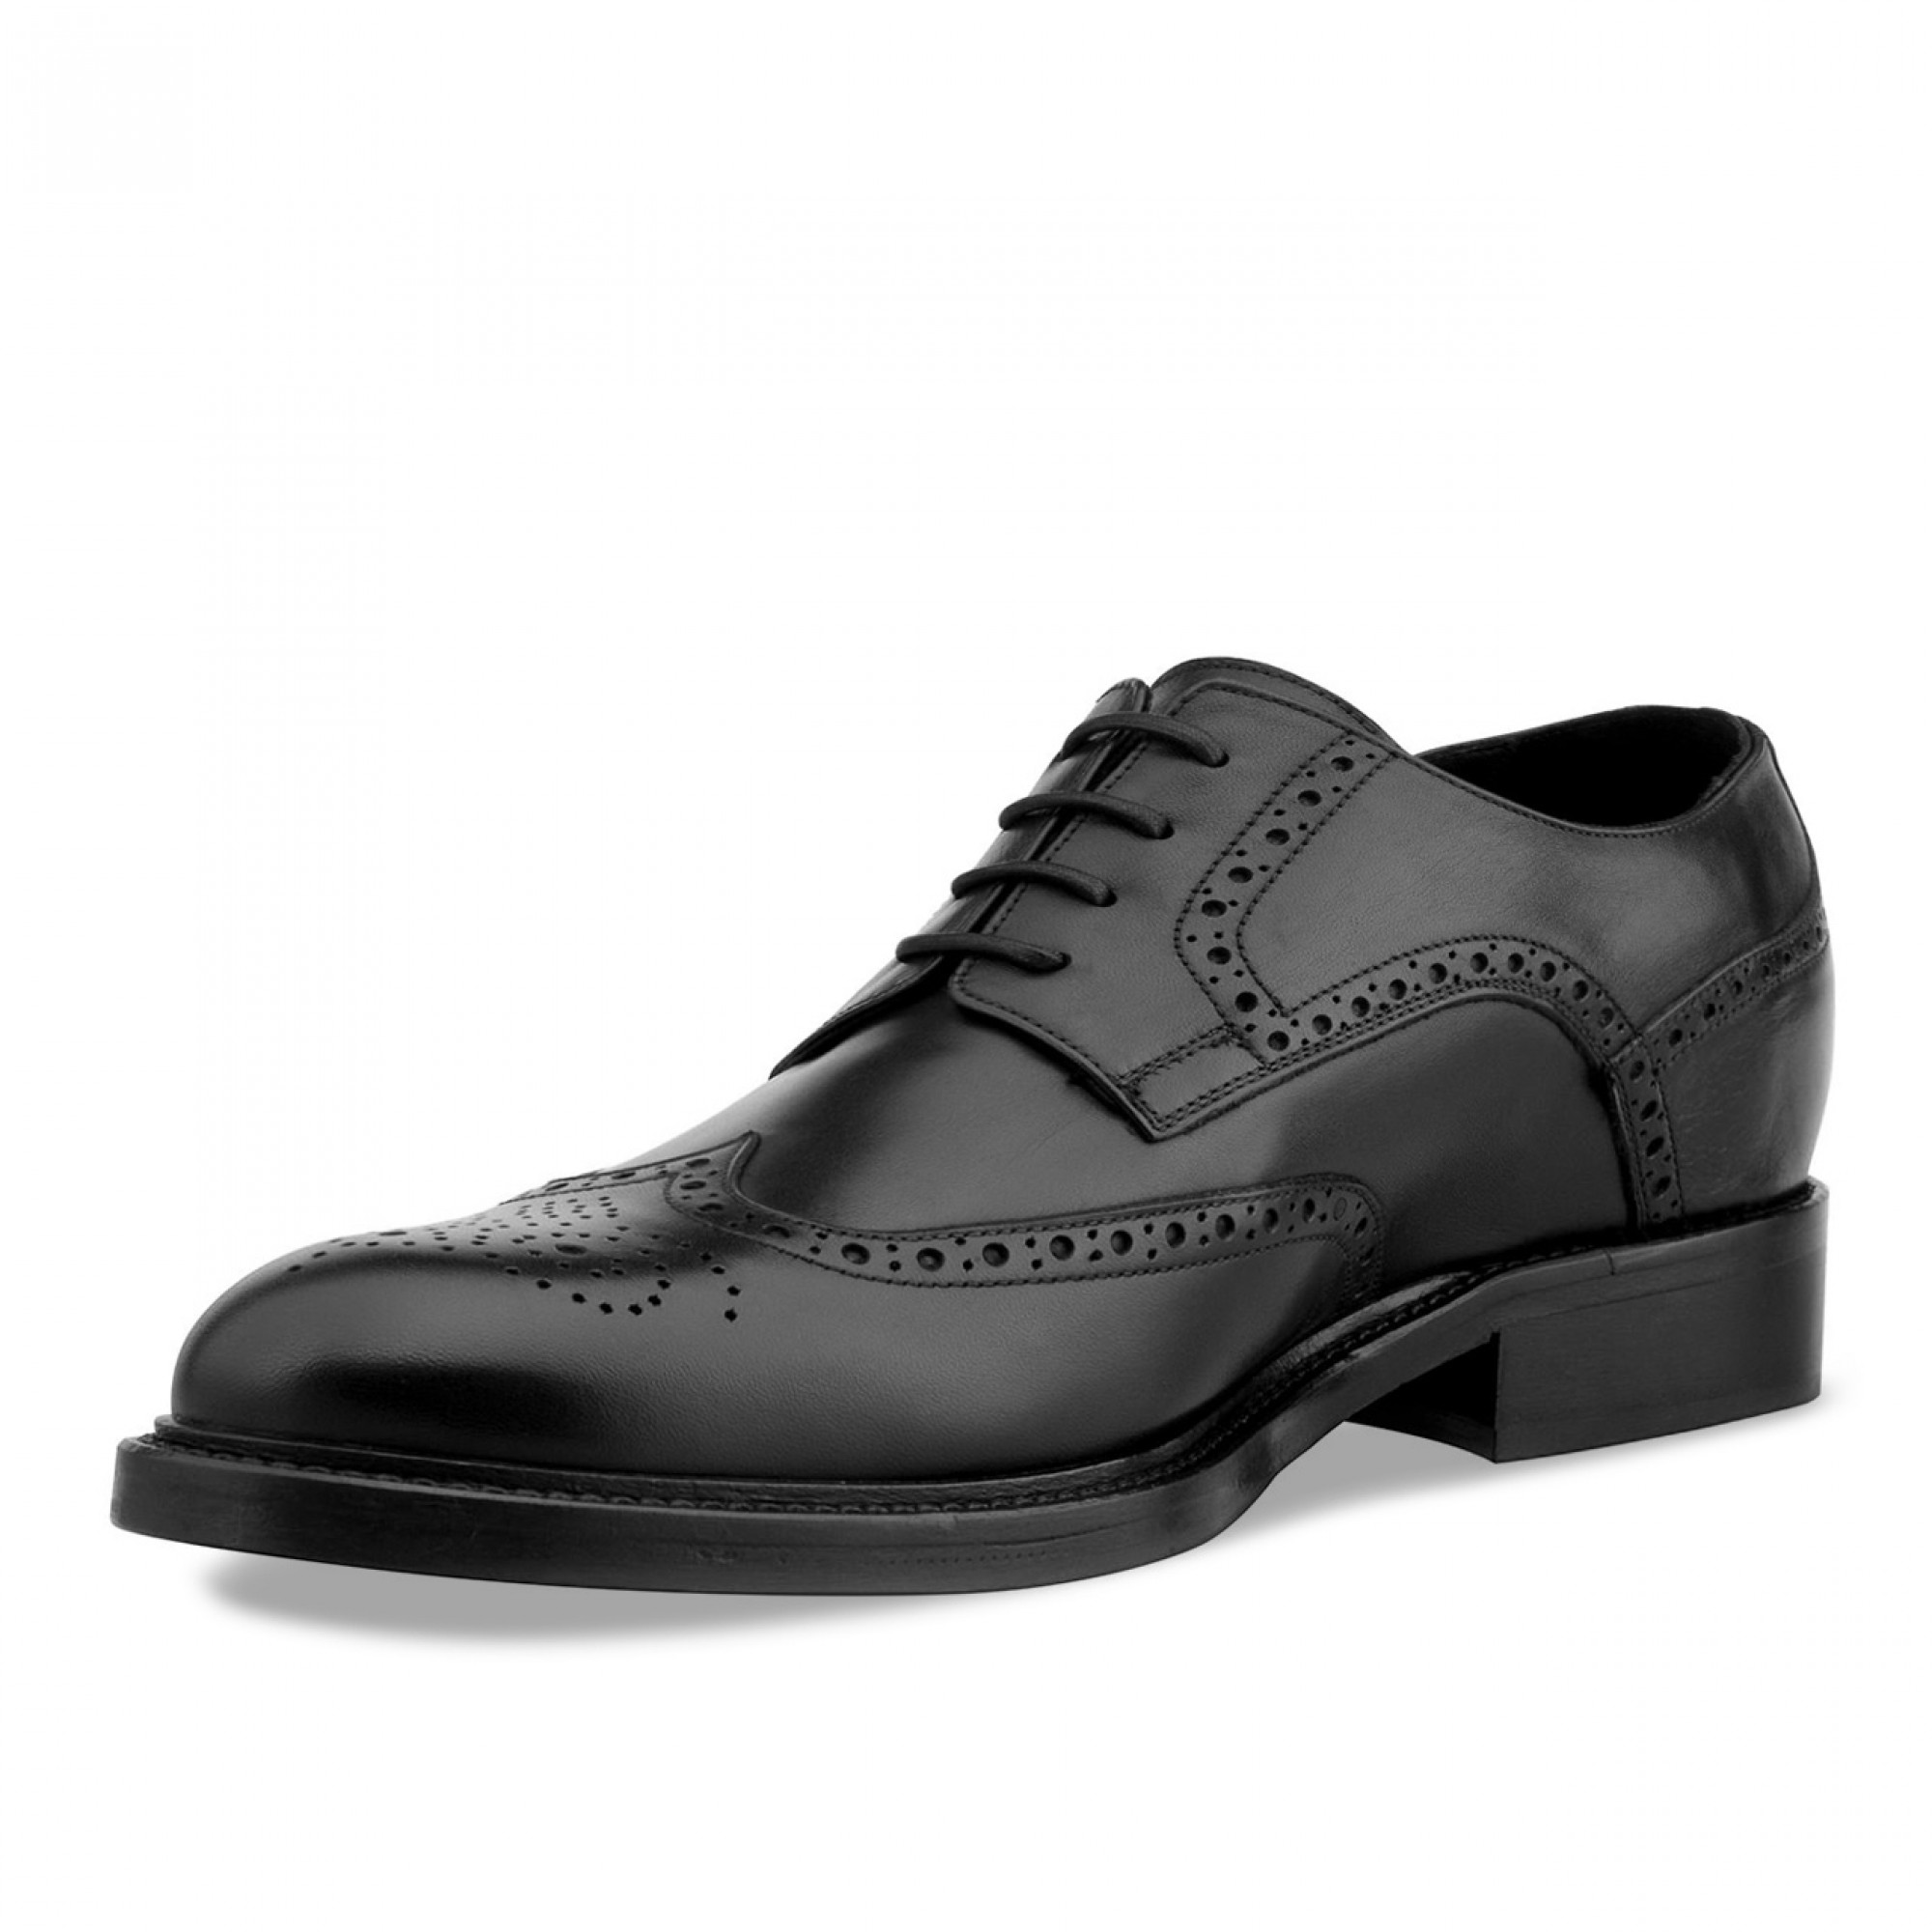 Venezia - Elevator Shoes in Full Grain Leather from 2.4 to 3.1 inches